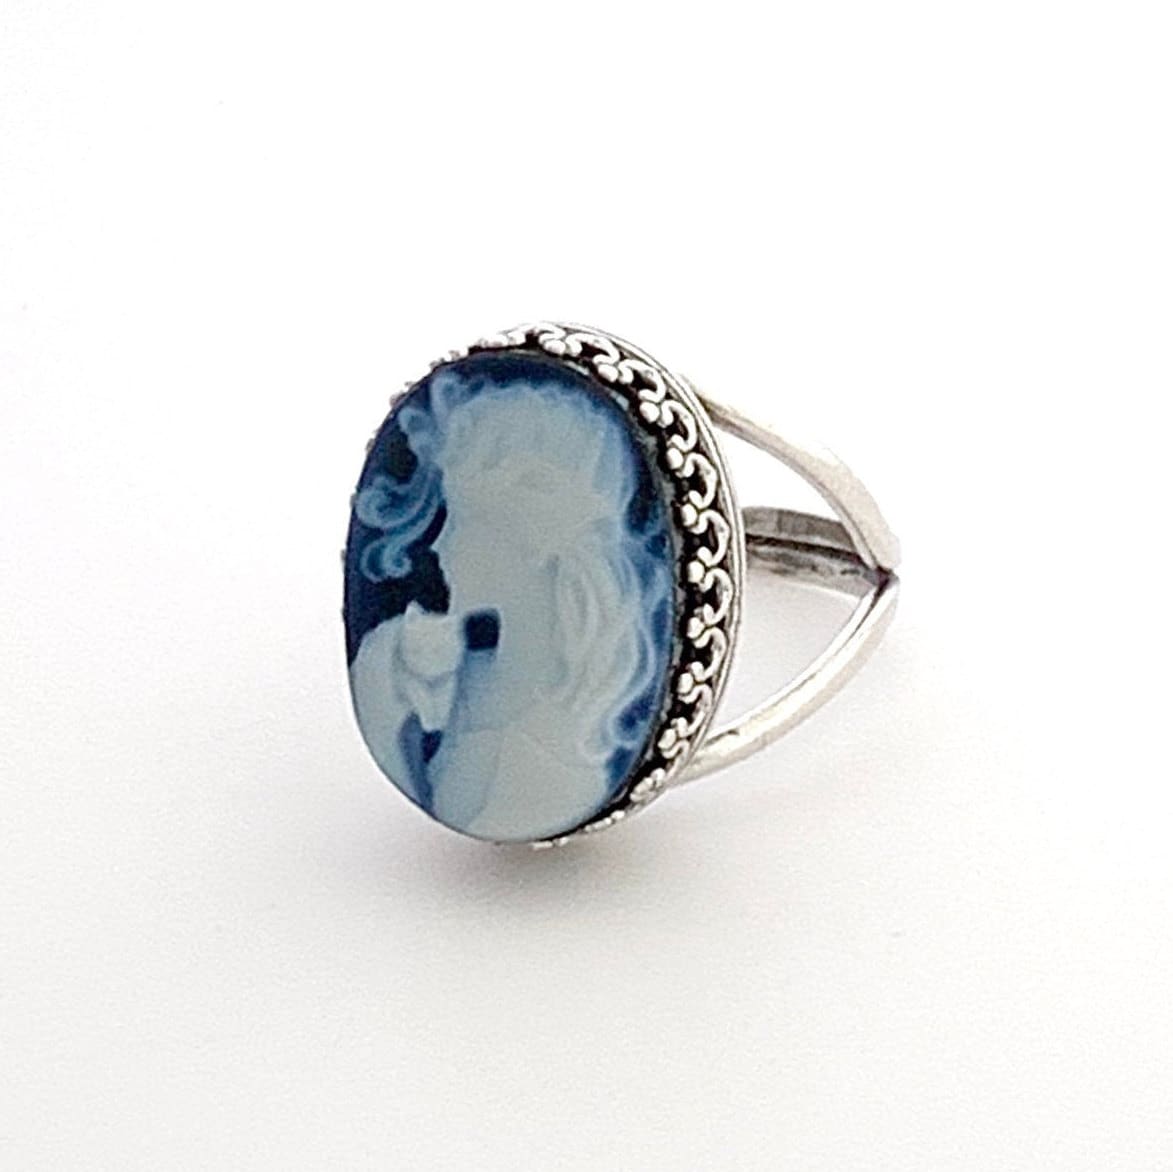 Silver Cat Cameo Ring, Unique Gift for Cat Lover, Sterling Silver Adjustable Ring, Cat Jewelry, European Cameo Jewelry Gifts for Women